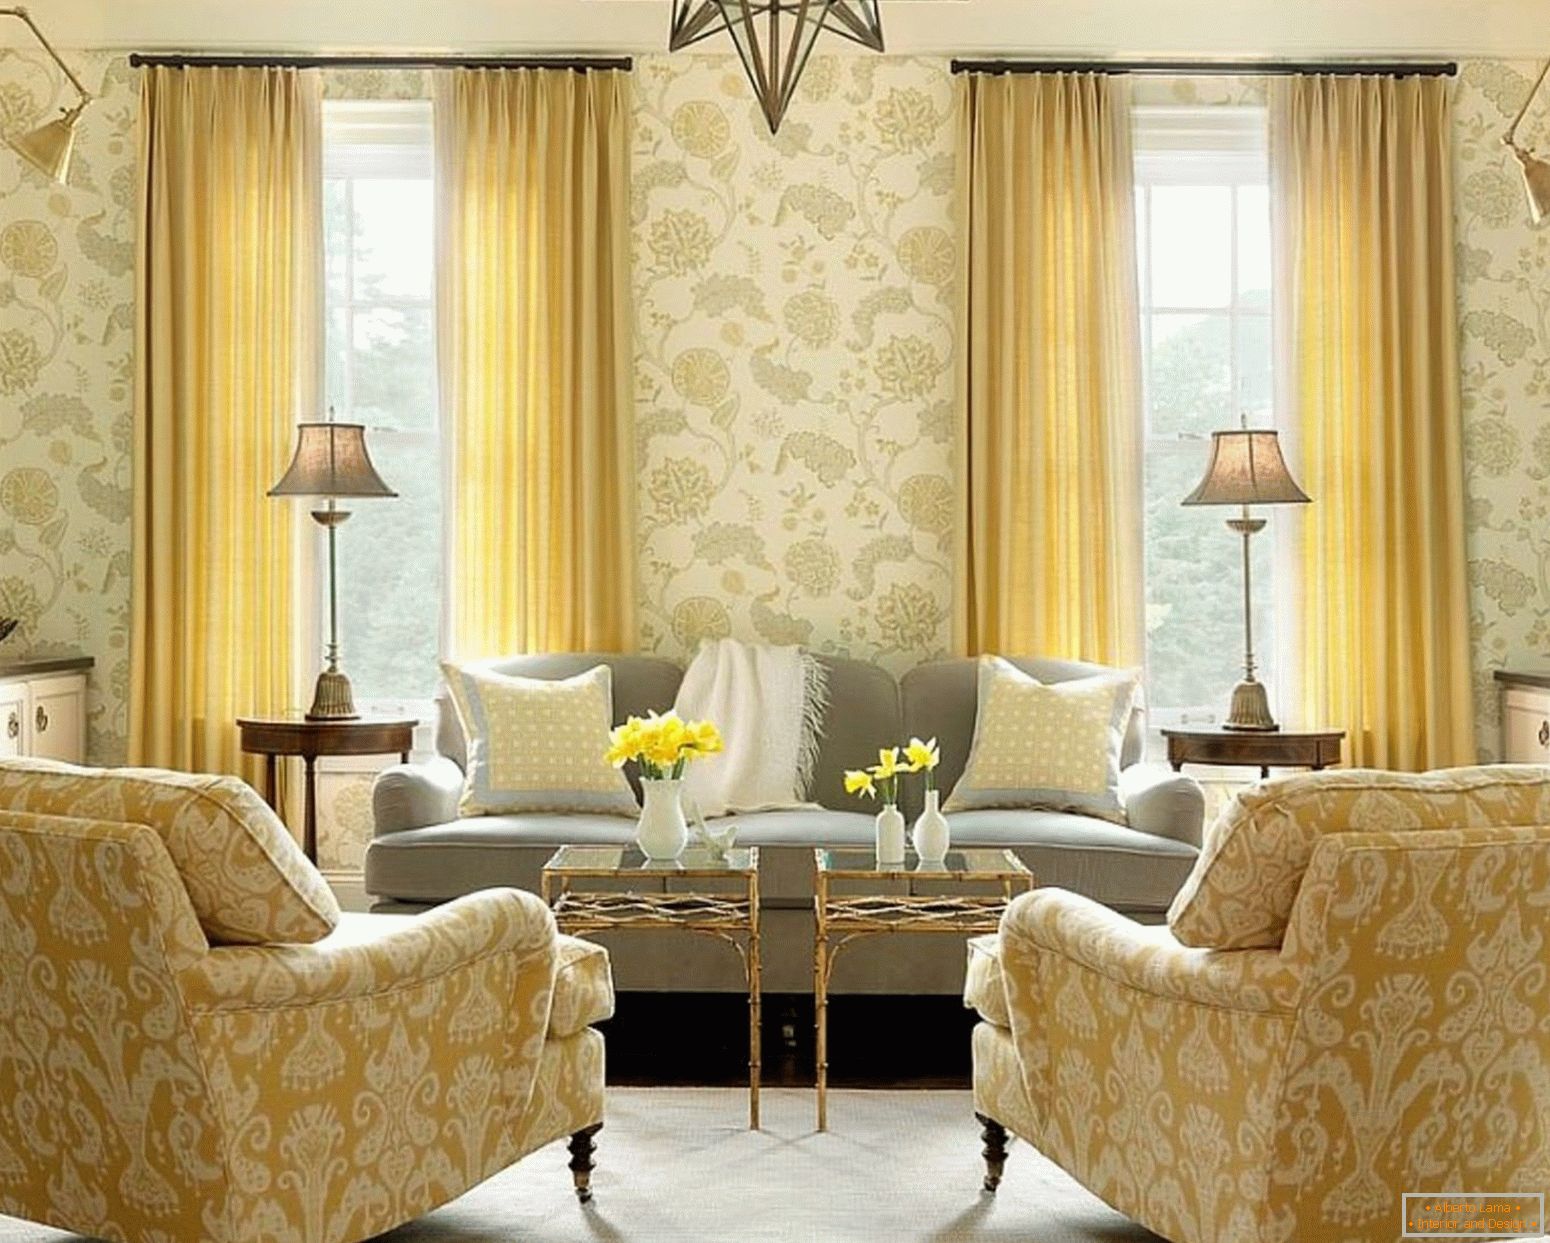 A combination of wallpaper and furniture in the living room